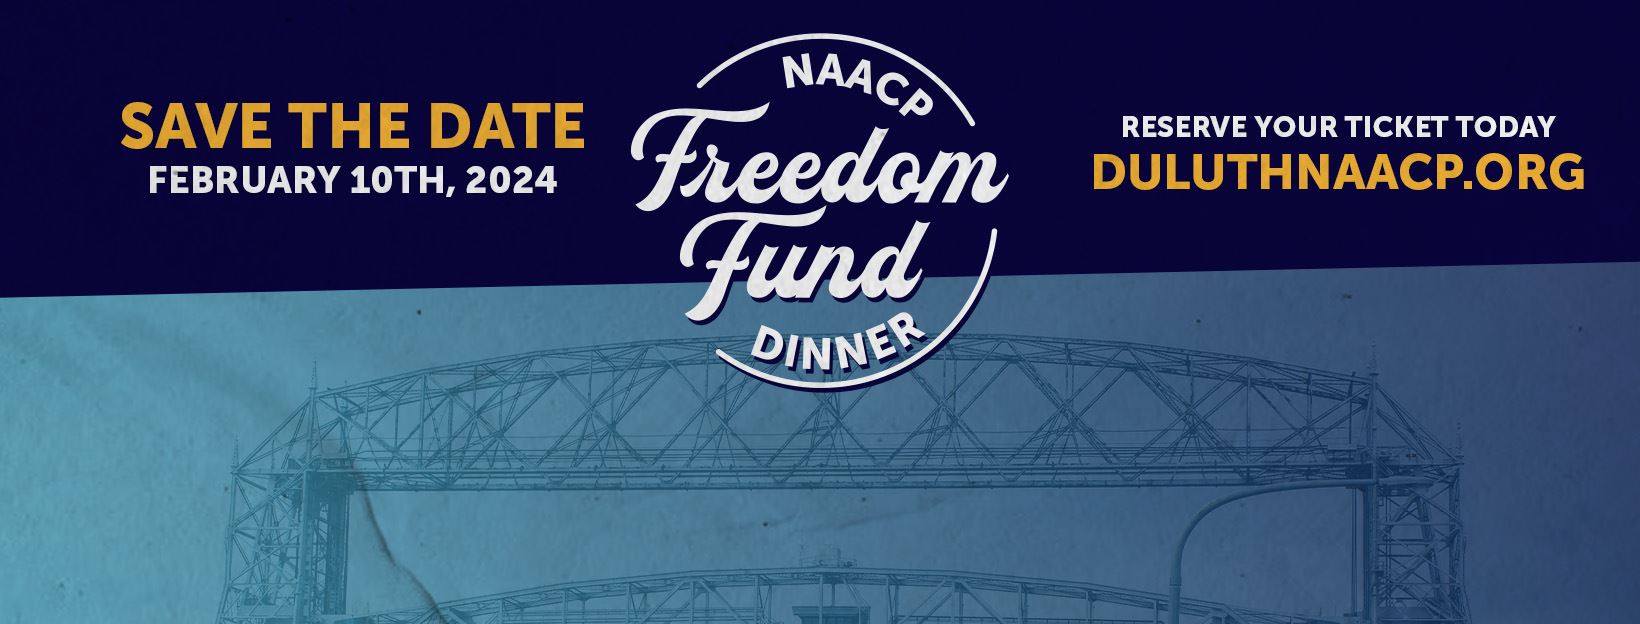 Save the Date - NAACP Freedom Fund dinner - reserve your ticket today